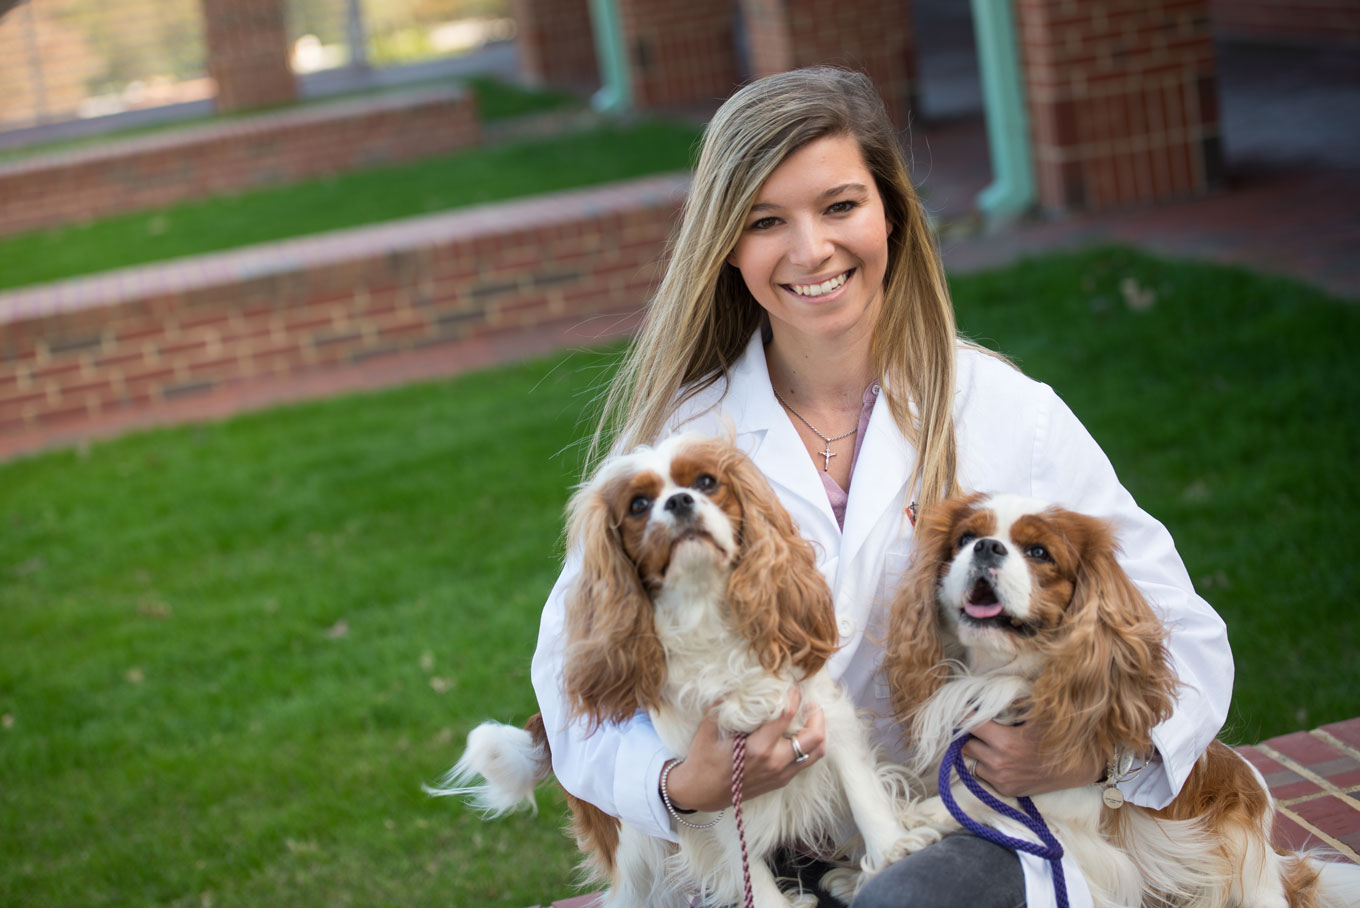 Courtney Rousse Sparks holding two spaniels